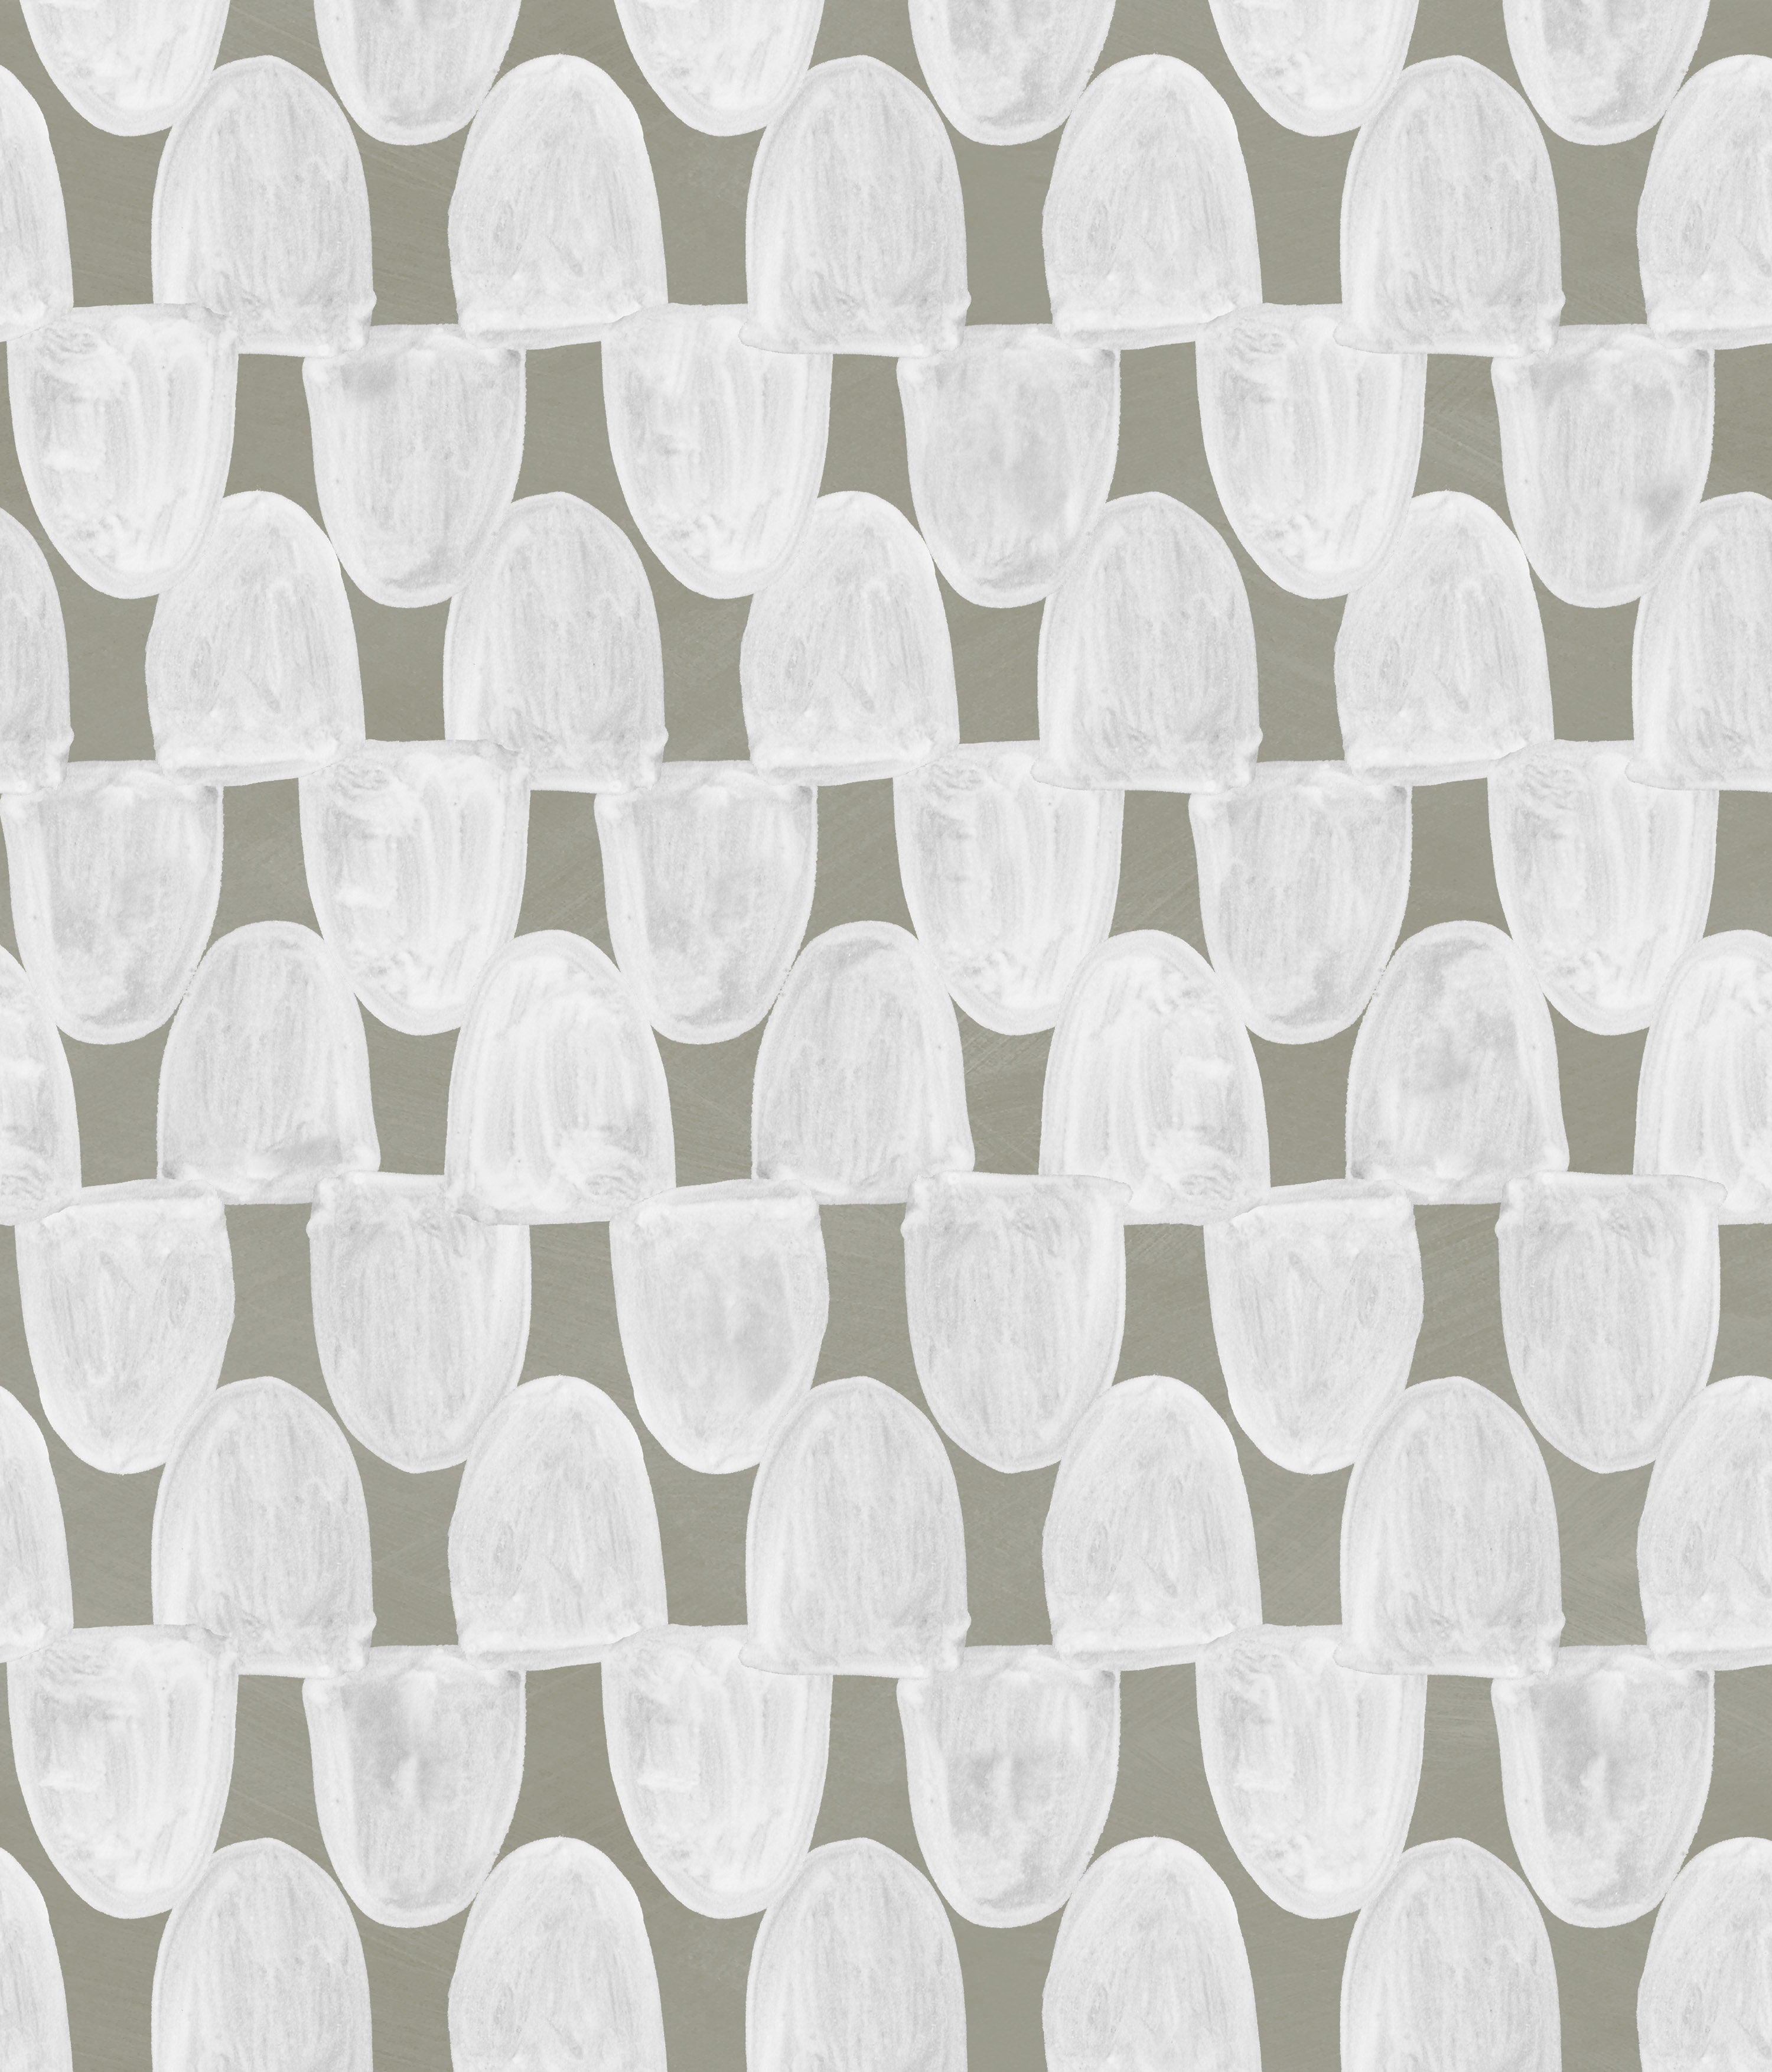 Detail of wallpaper in an abstract scalloped print in white on an olive field.